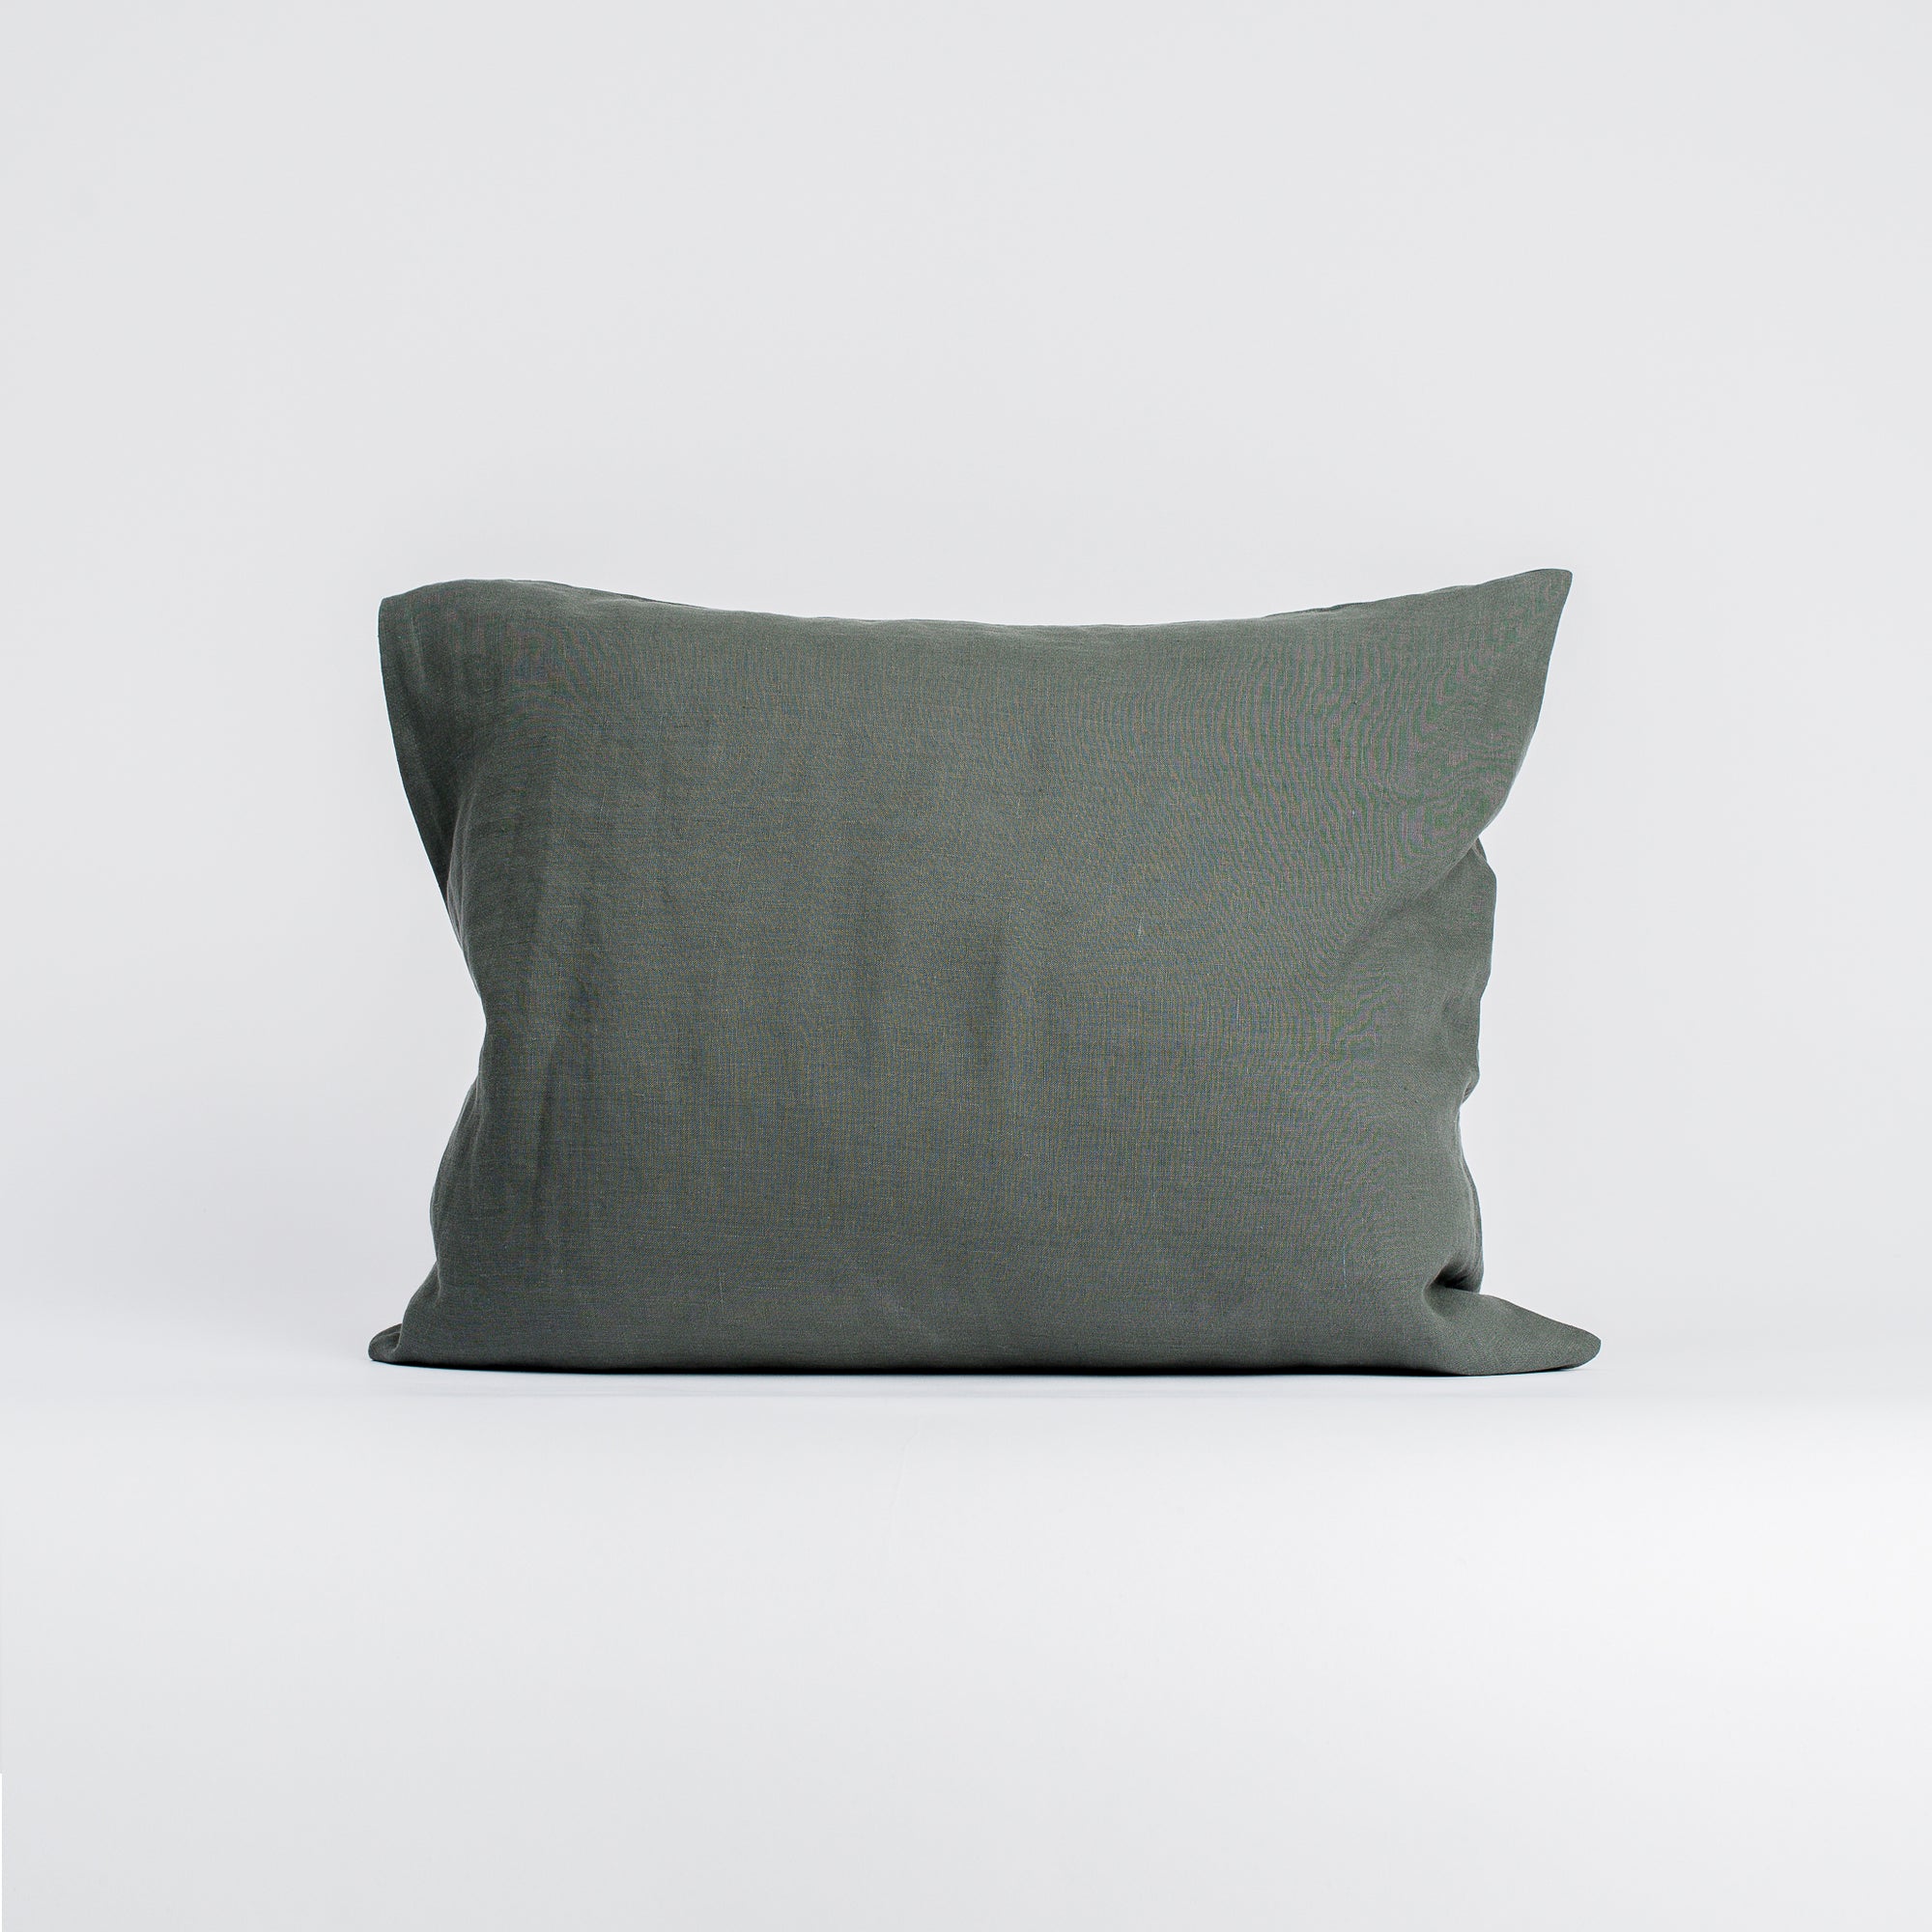 Set of 2, 4, 6 Stonewashed Linen Pillow Cases in Stylish Forest  Green/softened Linen Throw Pillows in Hunter Green/decorative Pillow Cases  